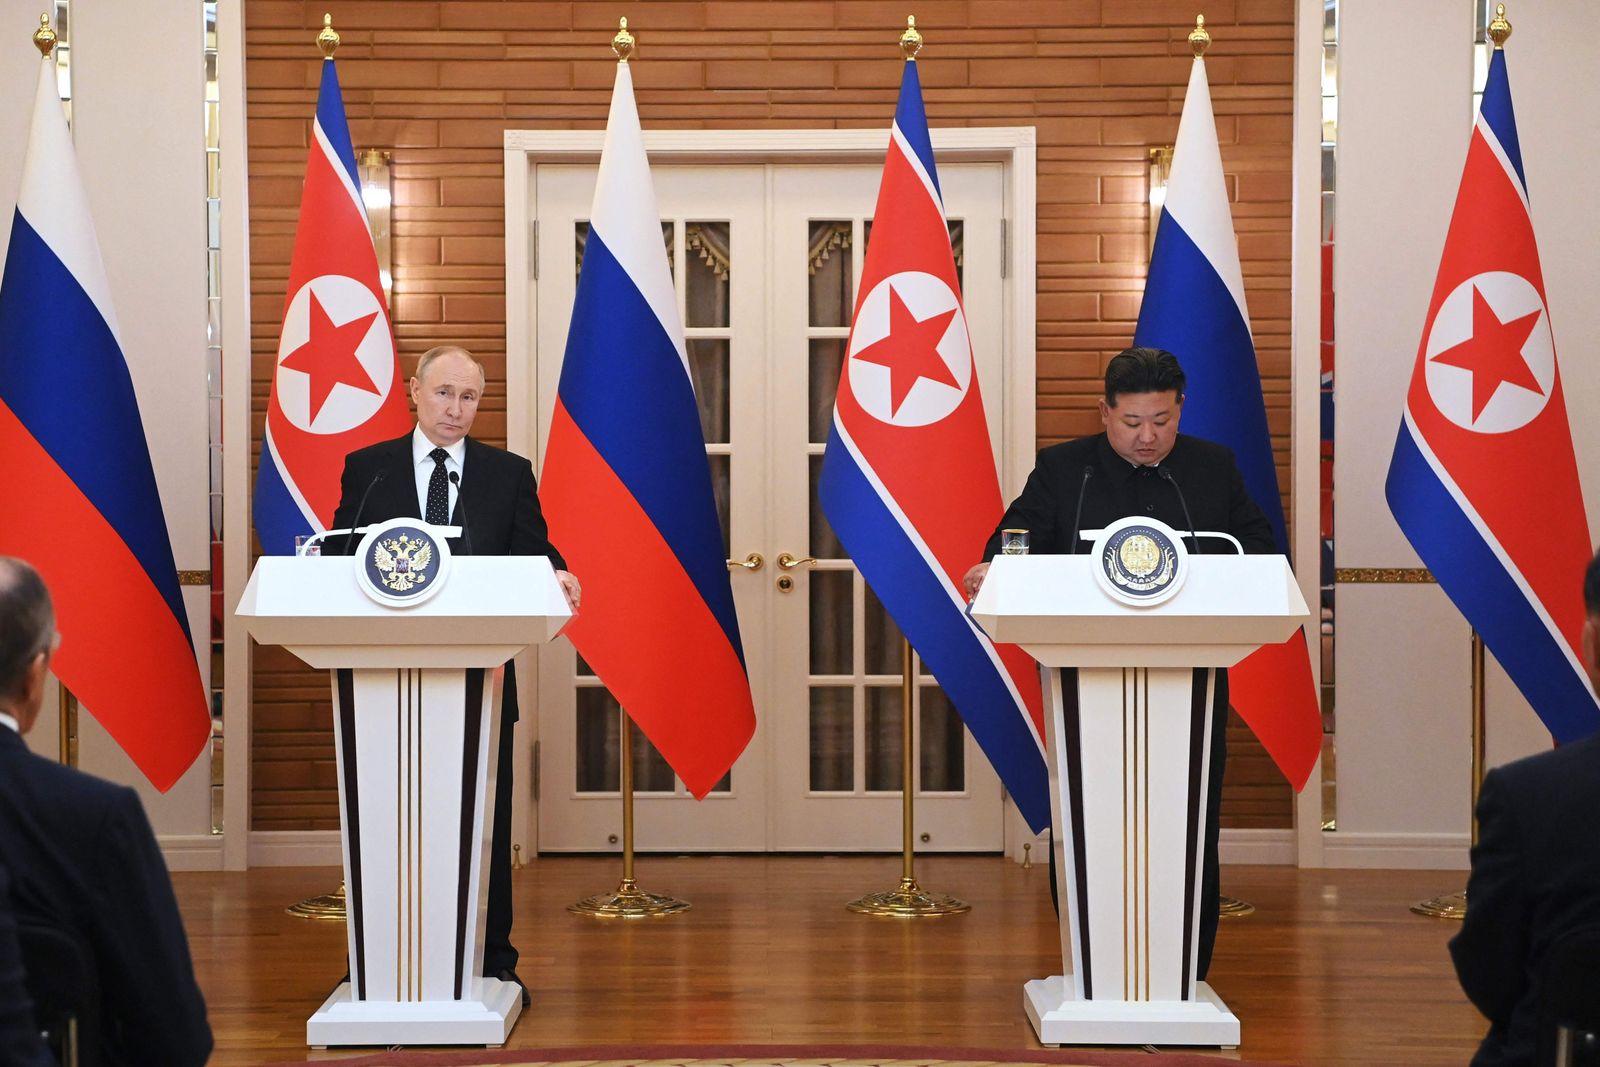 In this pool photograph distributed by the Russian state agency Sputnik, Russian President Vladimir Putin (L) and North Korea's leader Kim Jong Un talk to the media following their billaterial talks at Kumsusan state residence in Pyongyang on June 19, 2024. Russian President Vladimir Putin signed a mutual defence agreement on June 19 with North Korea's Kim Jong Un, who offered his 'full support' on Ukraine. The pledge of military cooperation was part of a strategic treaty signed during a summit in Pyongyang, where Putin was making his first visit in 24 years. (Photo by Kristina Kormilitsyna / POOL / AFP) / -- Editor's note : this image is distributed by the Russian state owned agency Sputnik -